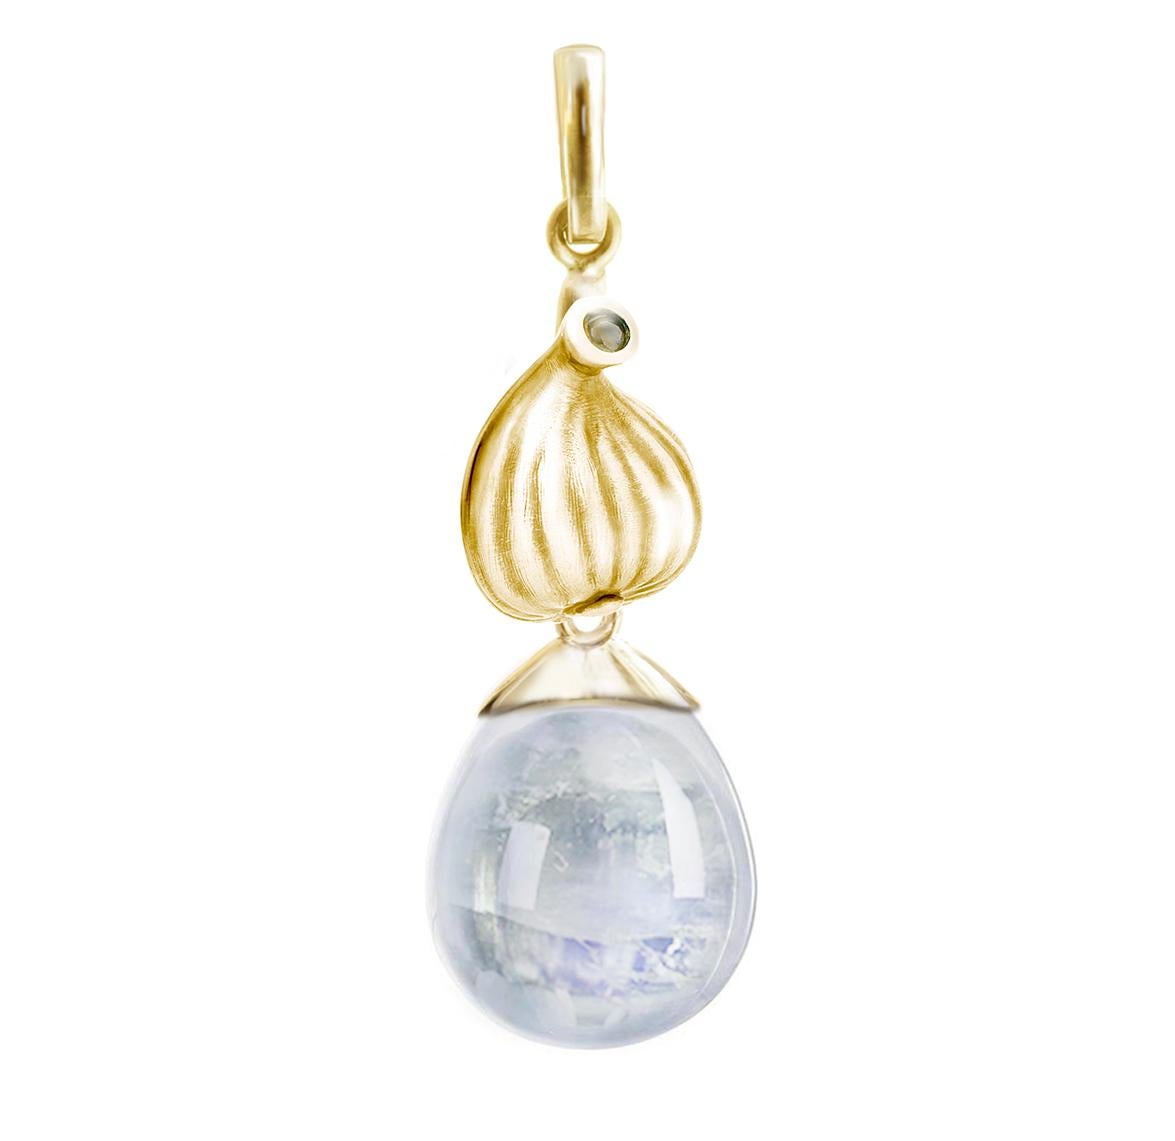 This Fig Garden drop pendant necklace is crafted in 18 karat yellow gold and features a natural moonstone. The gem drop is designed to allow light to pass through, giving it a radiant appearance. The necklace measures approximately 4 cm in length